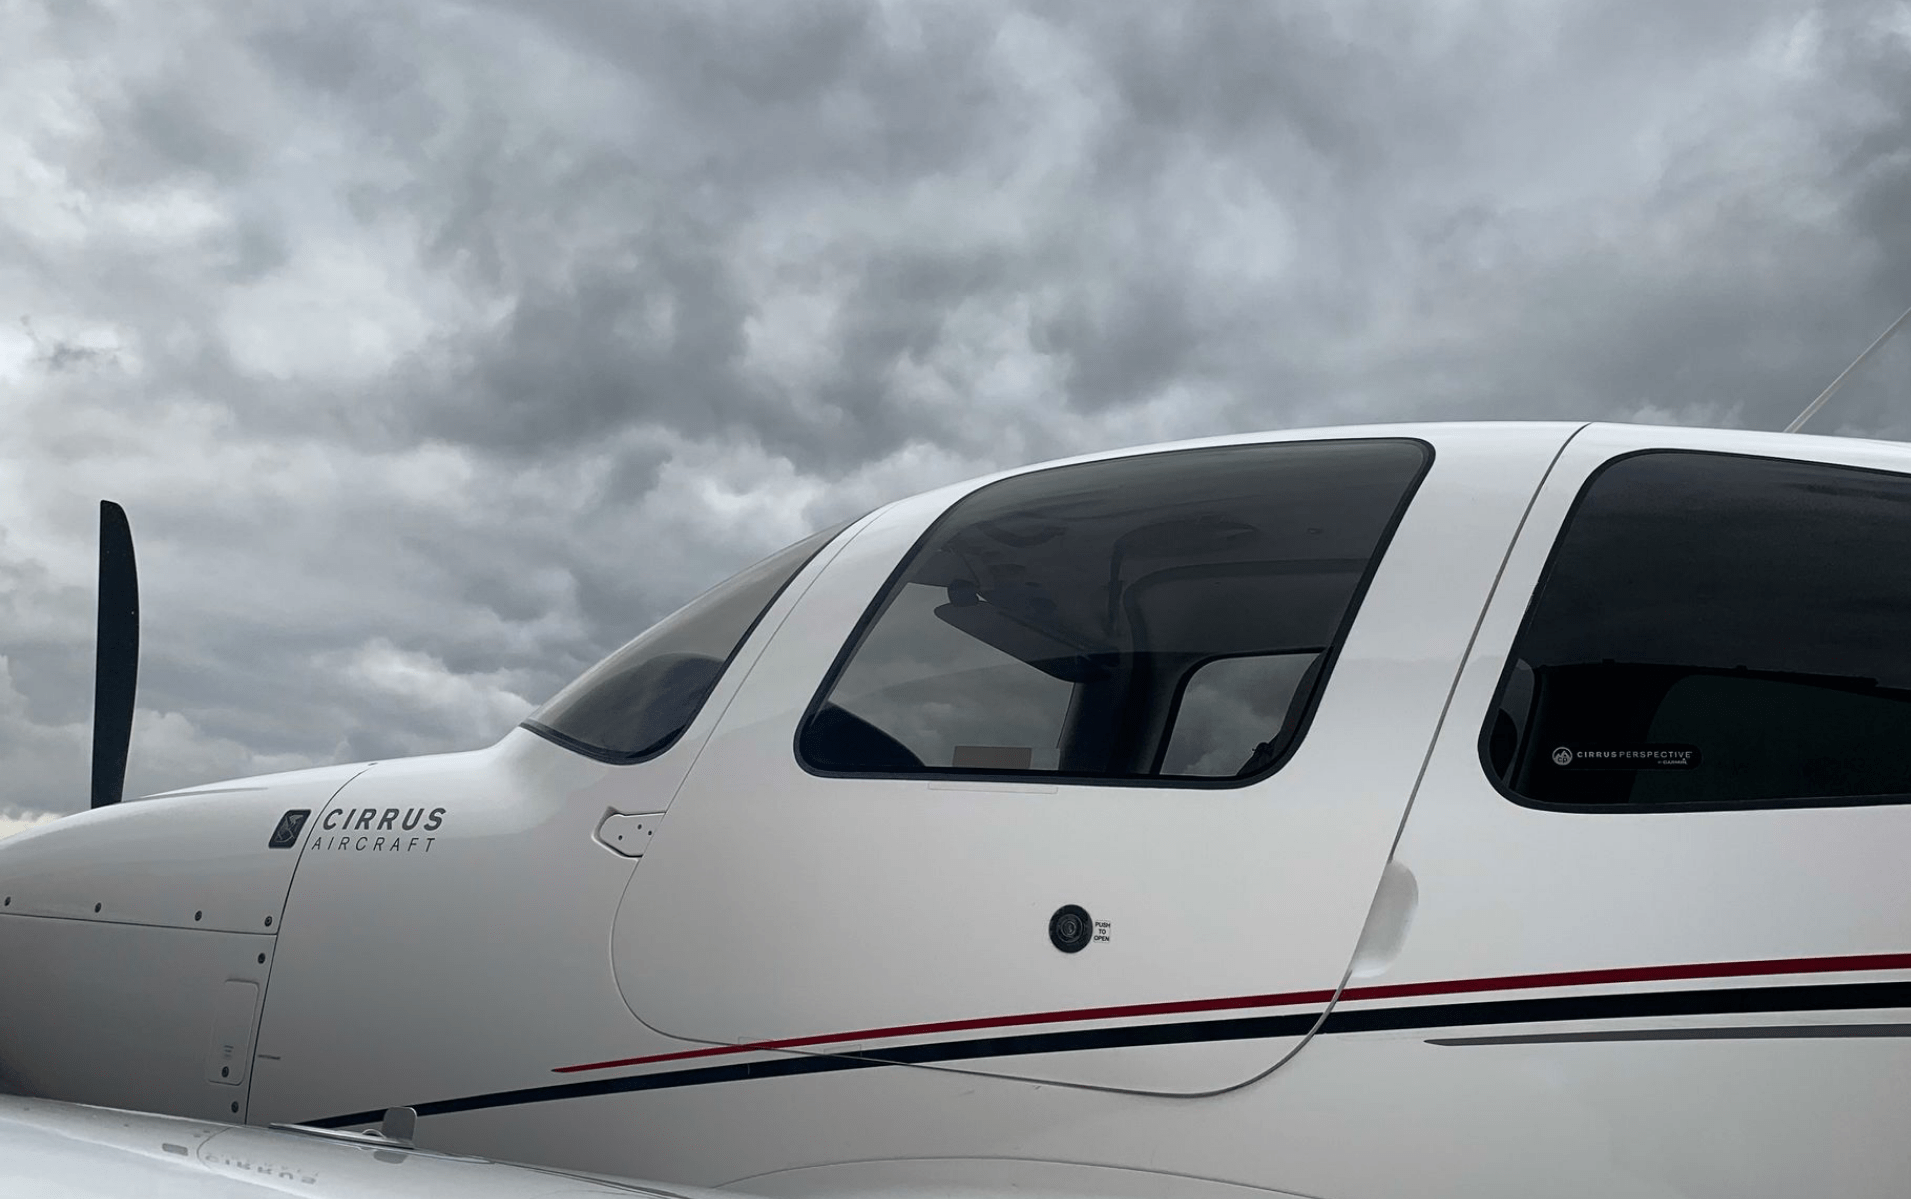 IREX / PIFR with Cirrus and Garmin 1000